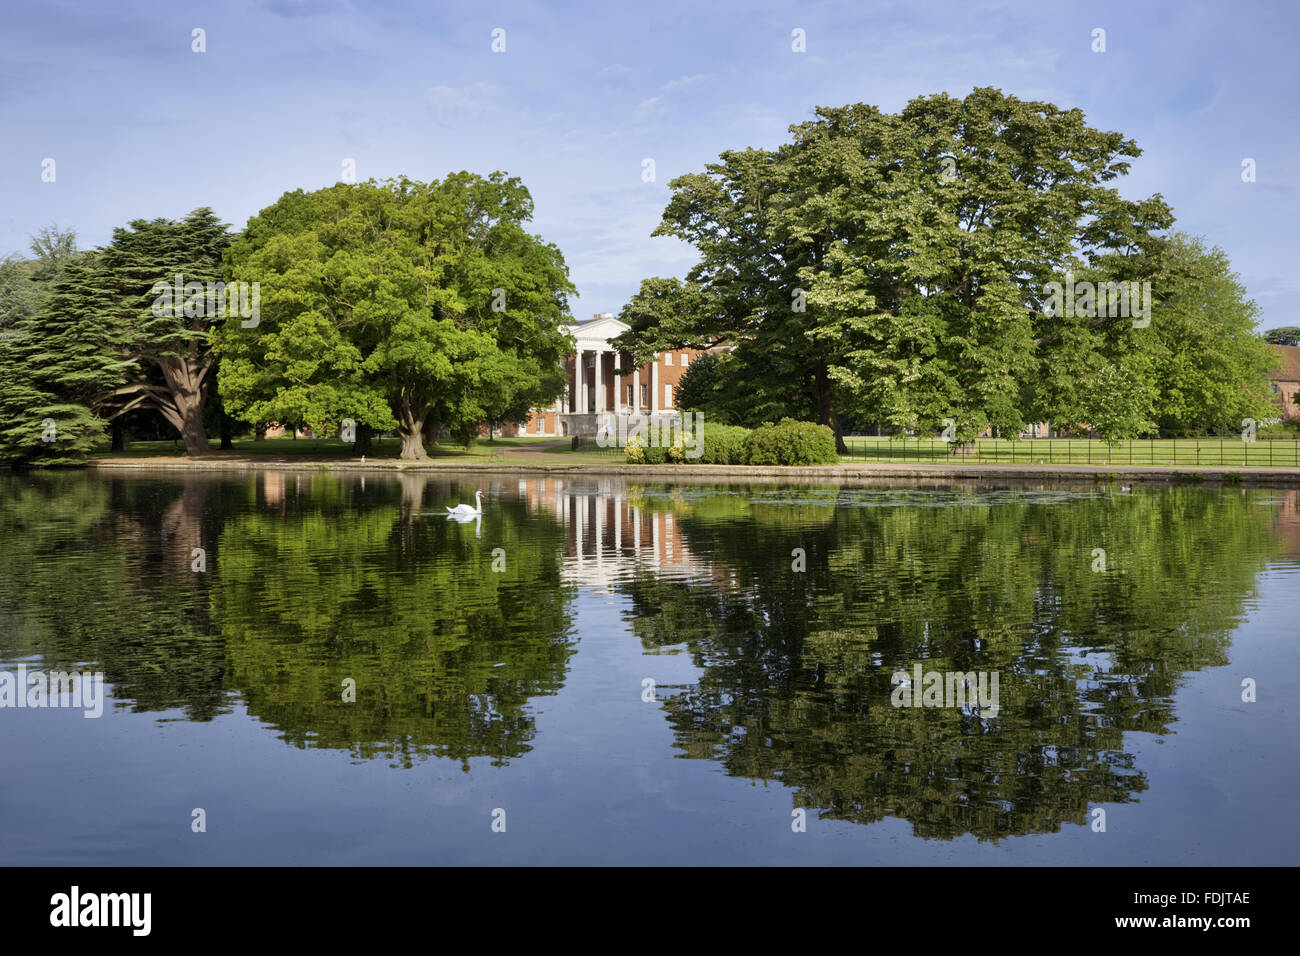 View across the lake towards the east front with the 'transparent' portico at Osterley, Middlesex. The house, originally Elizabethan, was remodelled in 1760 - 80 by Robert Adam. The lake was created during the transformation of the formal garden into land Stock Photo